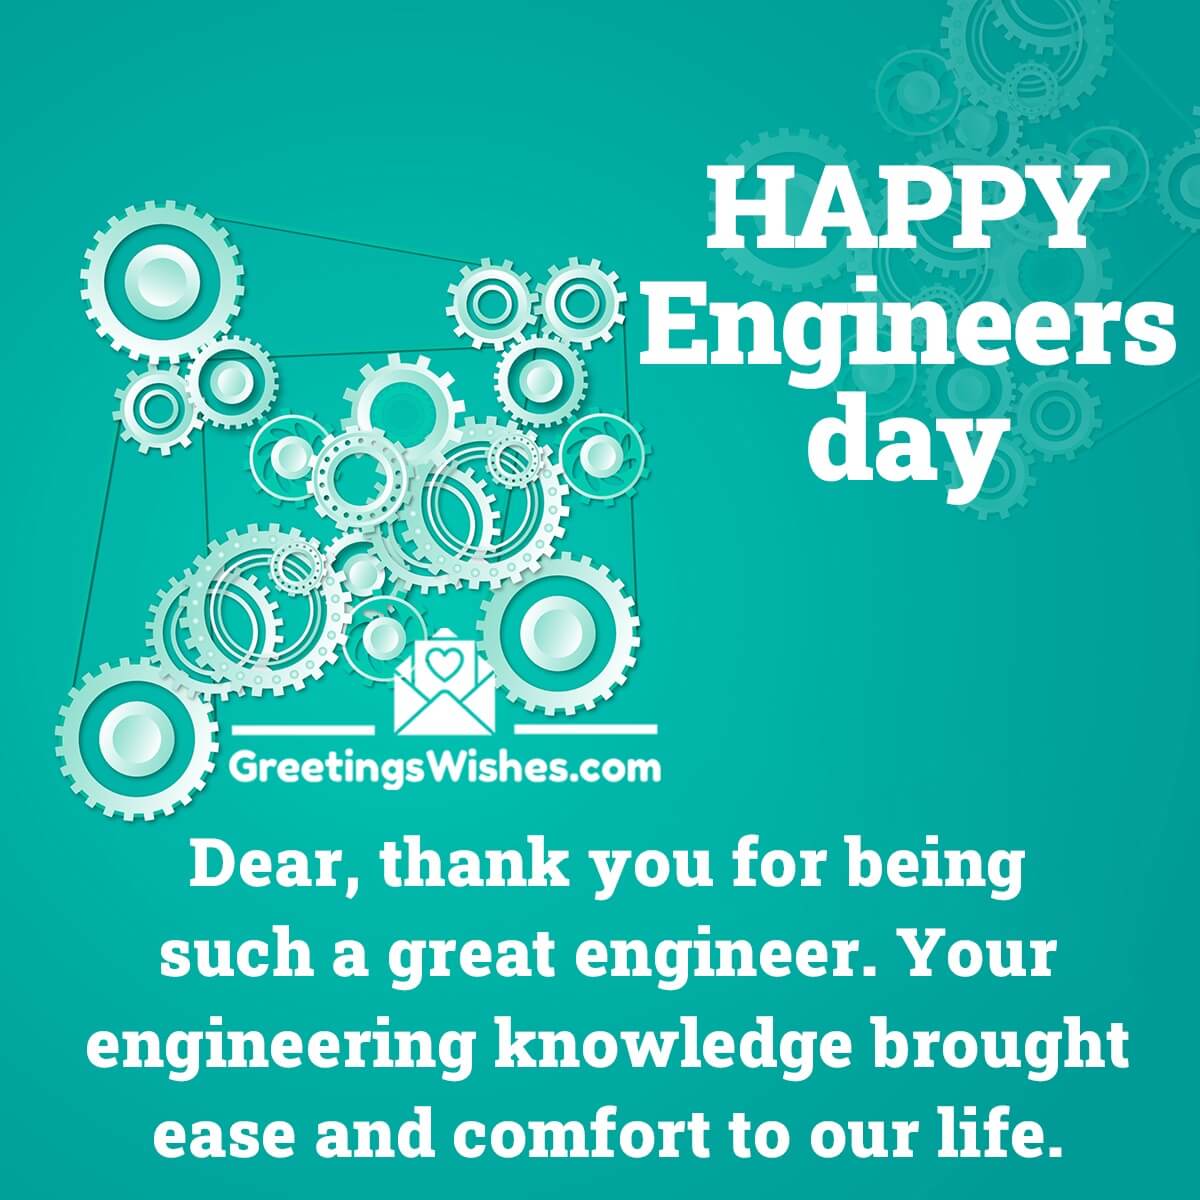 Engineers Day Wishes